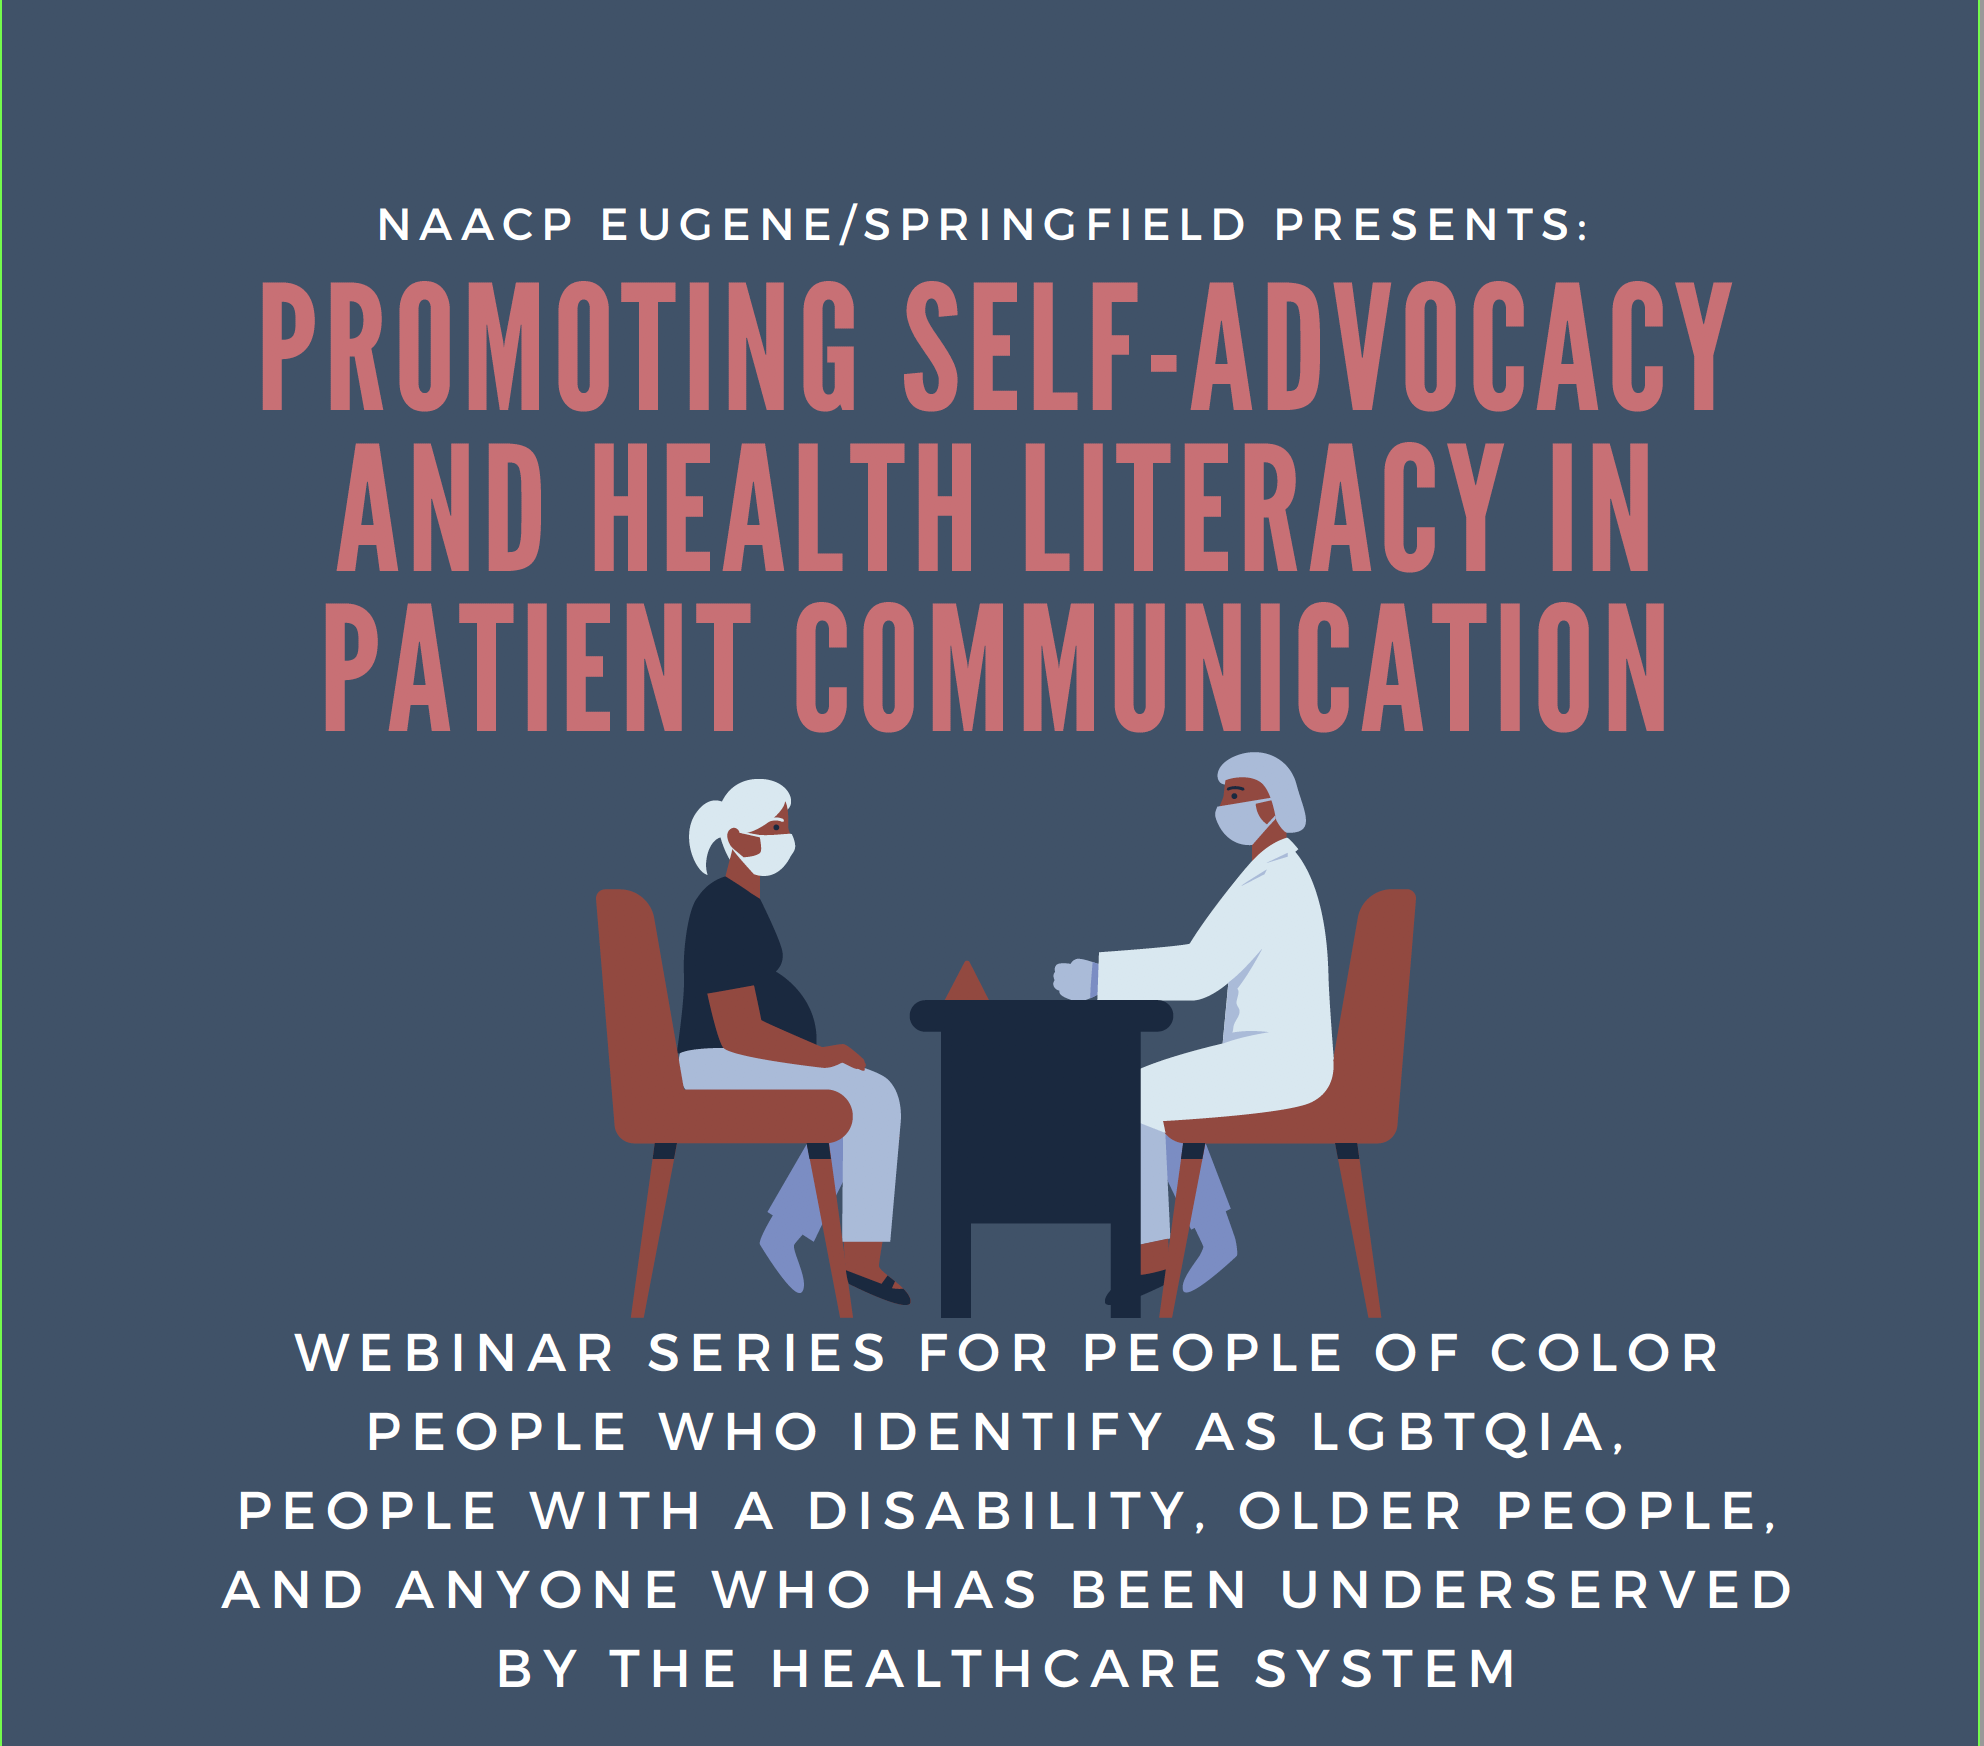 Promoting Self-Advocacy and Health Literacy in Patient Communication